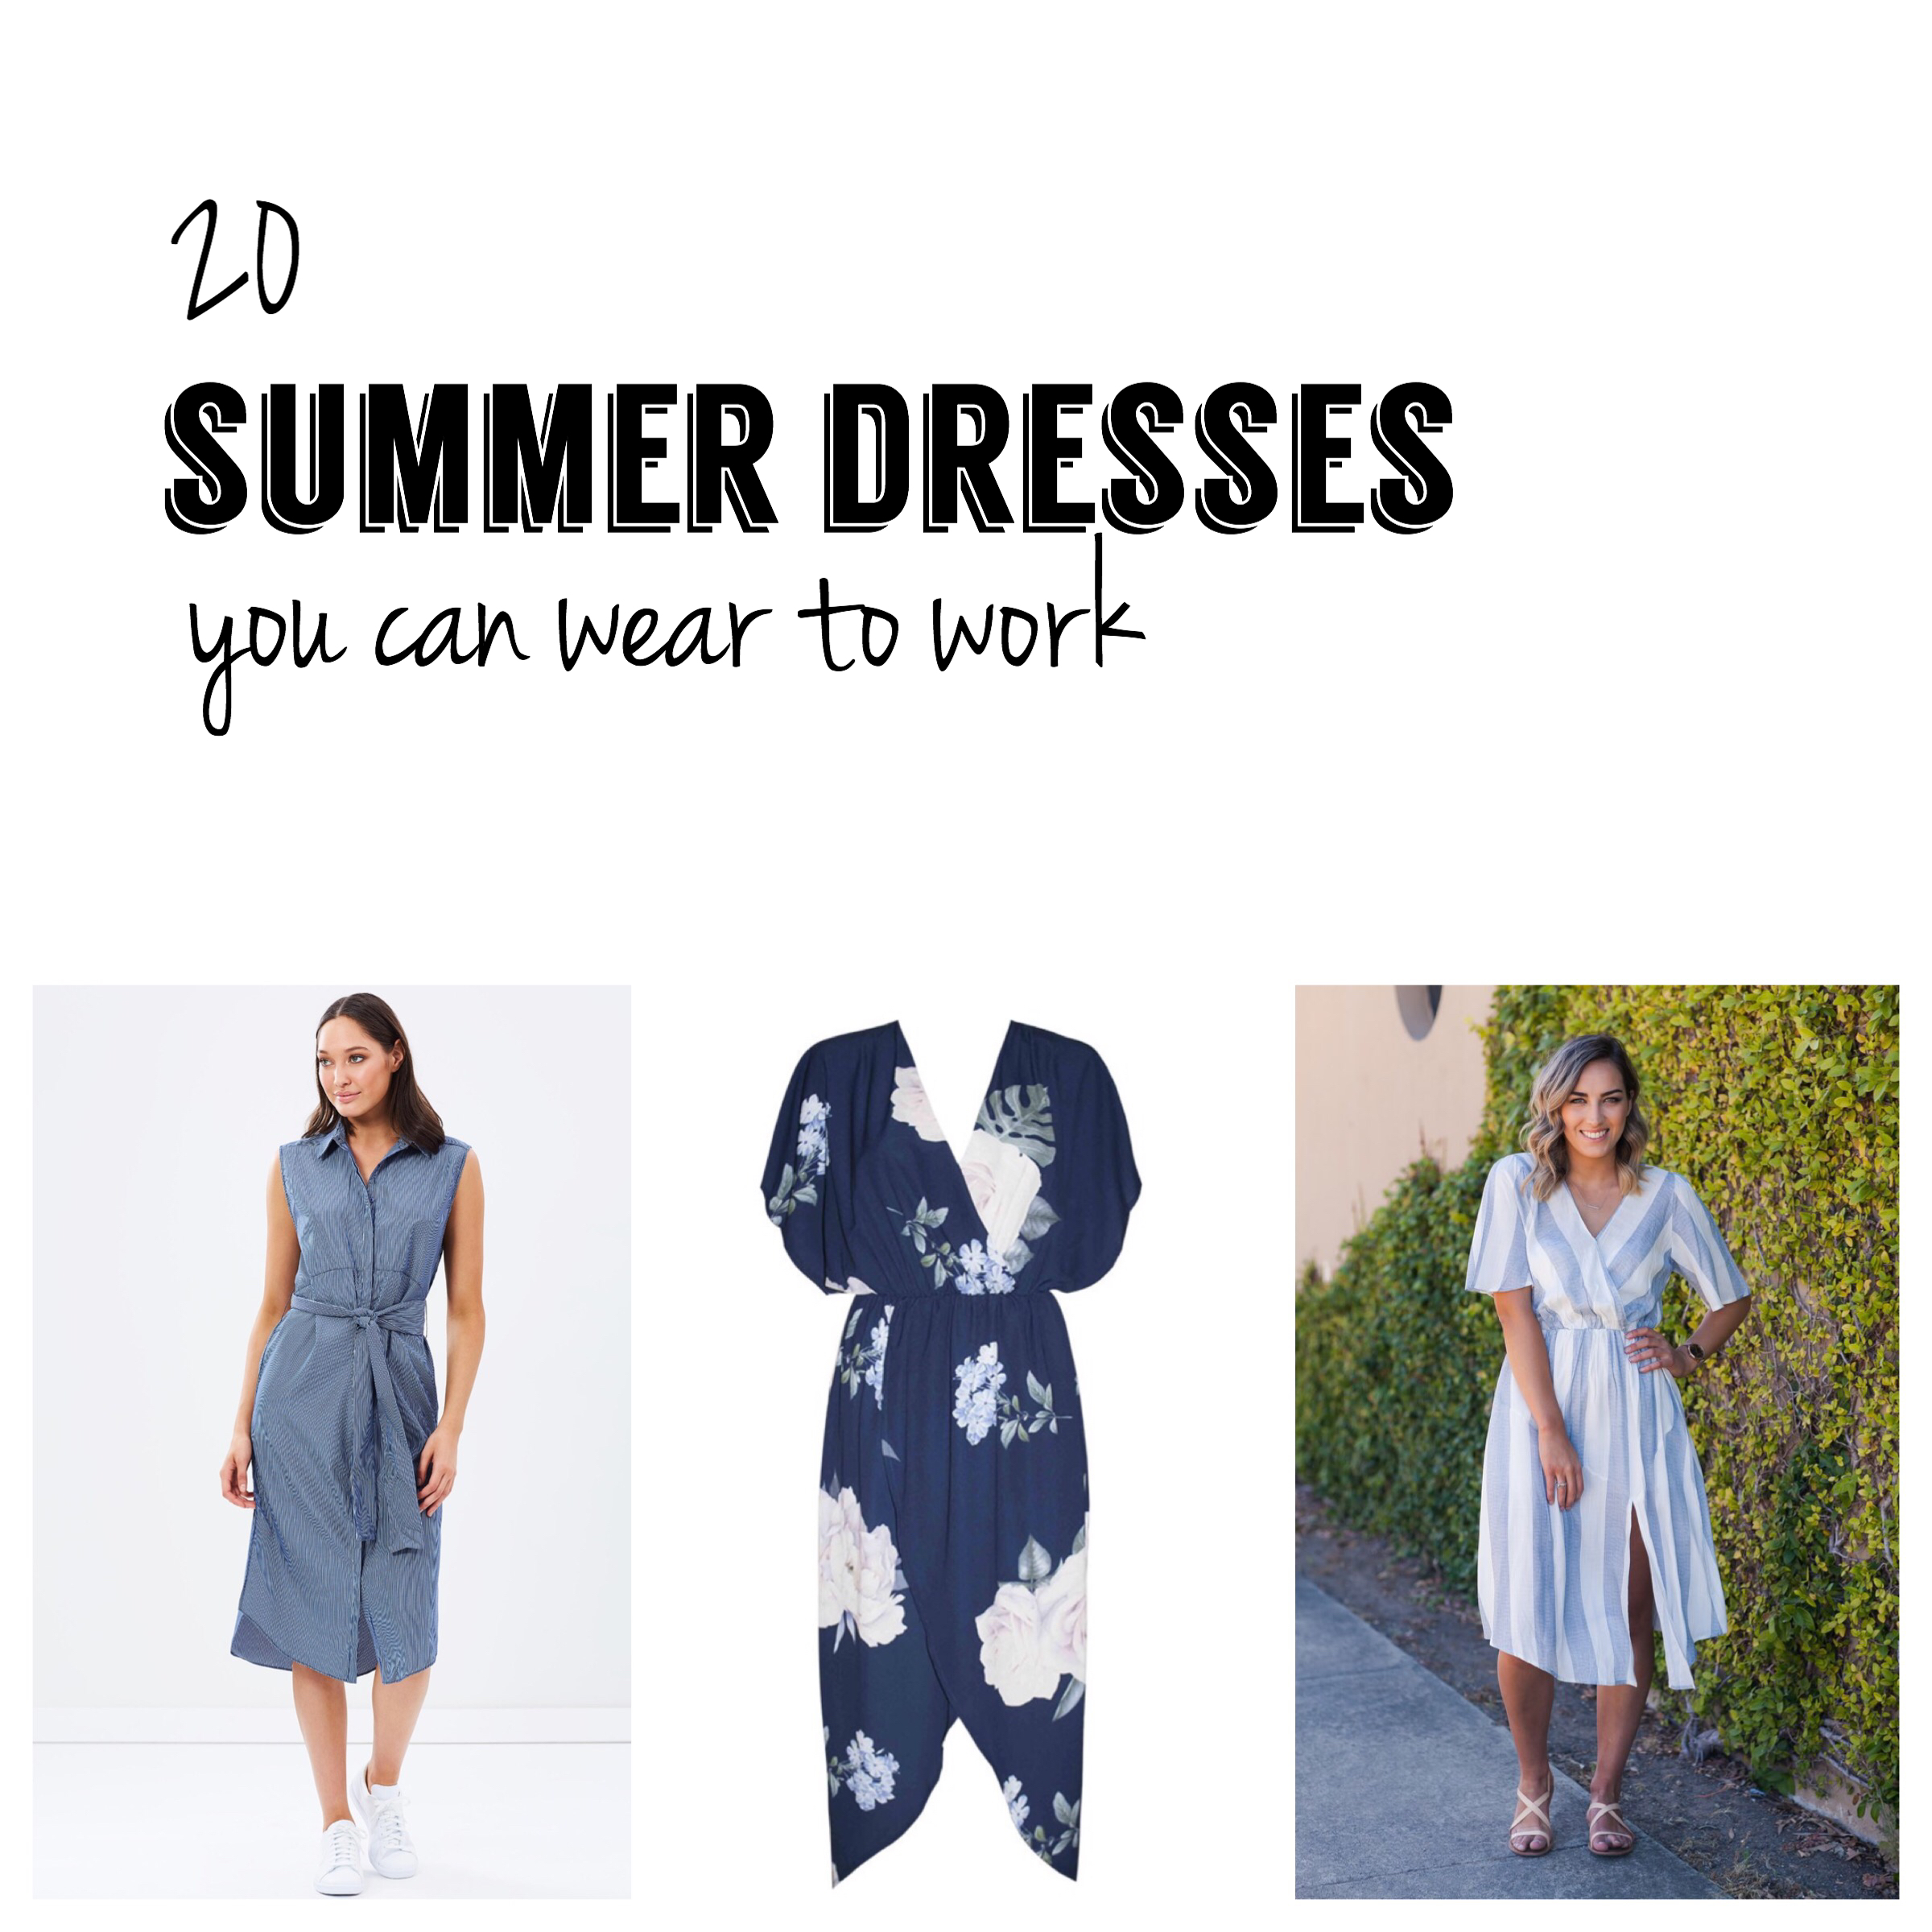 20 Summer Dresses You Can Wear to Work | Must-have Monday - Pretty Chuffed